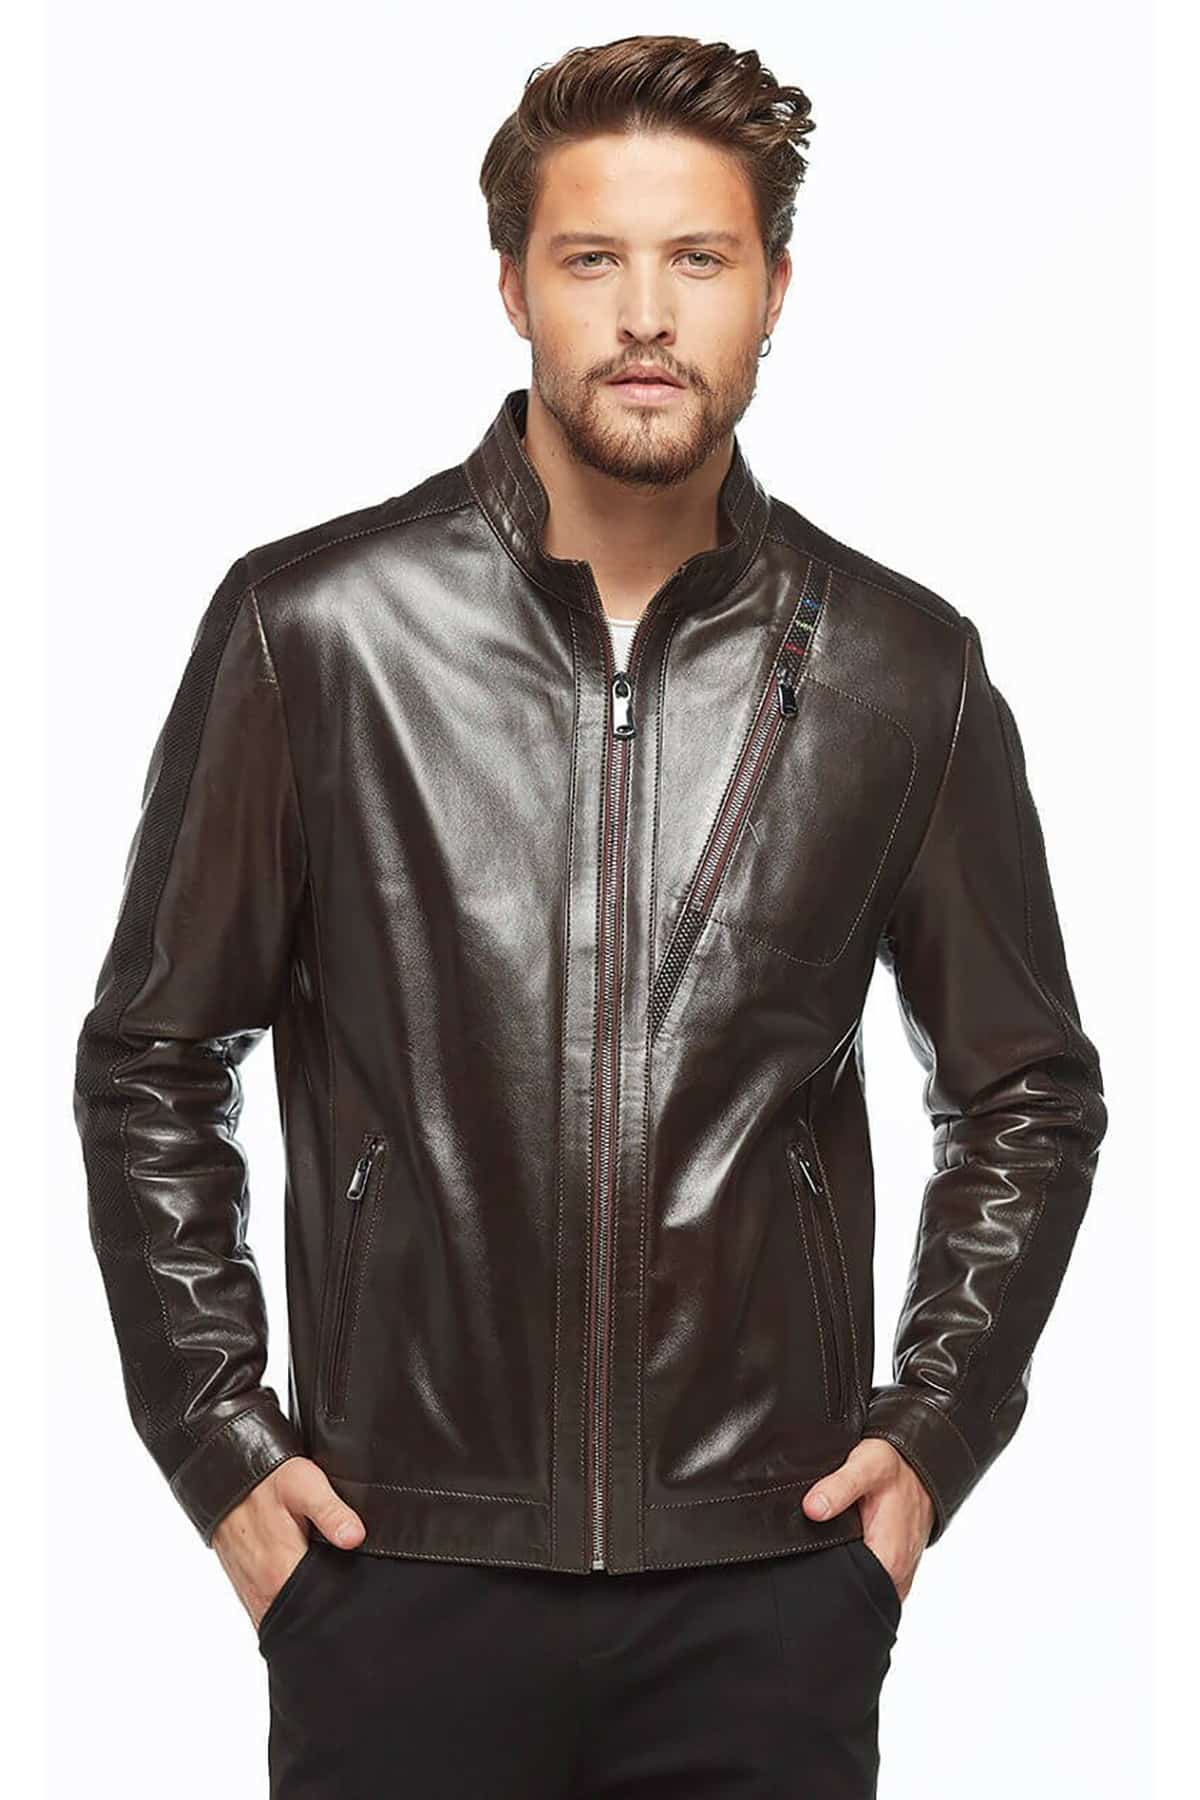 Buy Mens Quilted Black Leather Motorcycle Jacket | LucaJackets